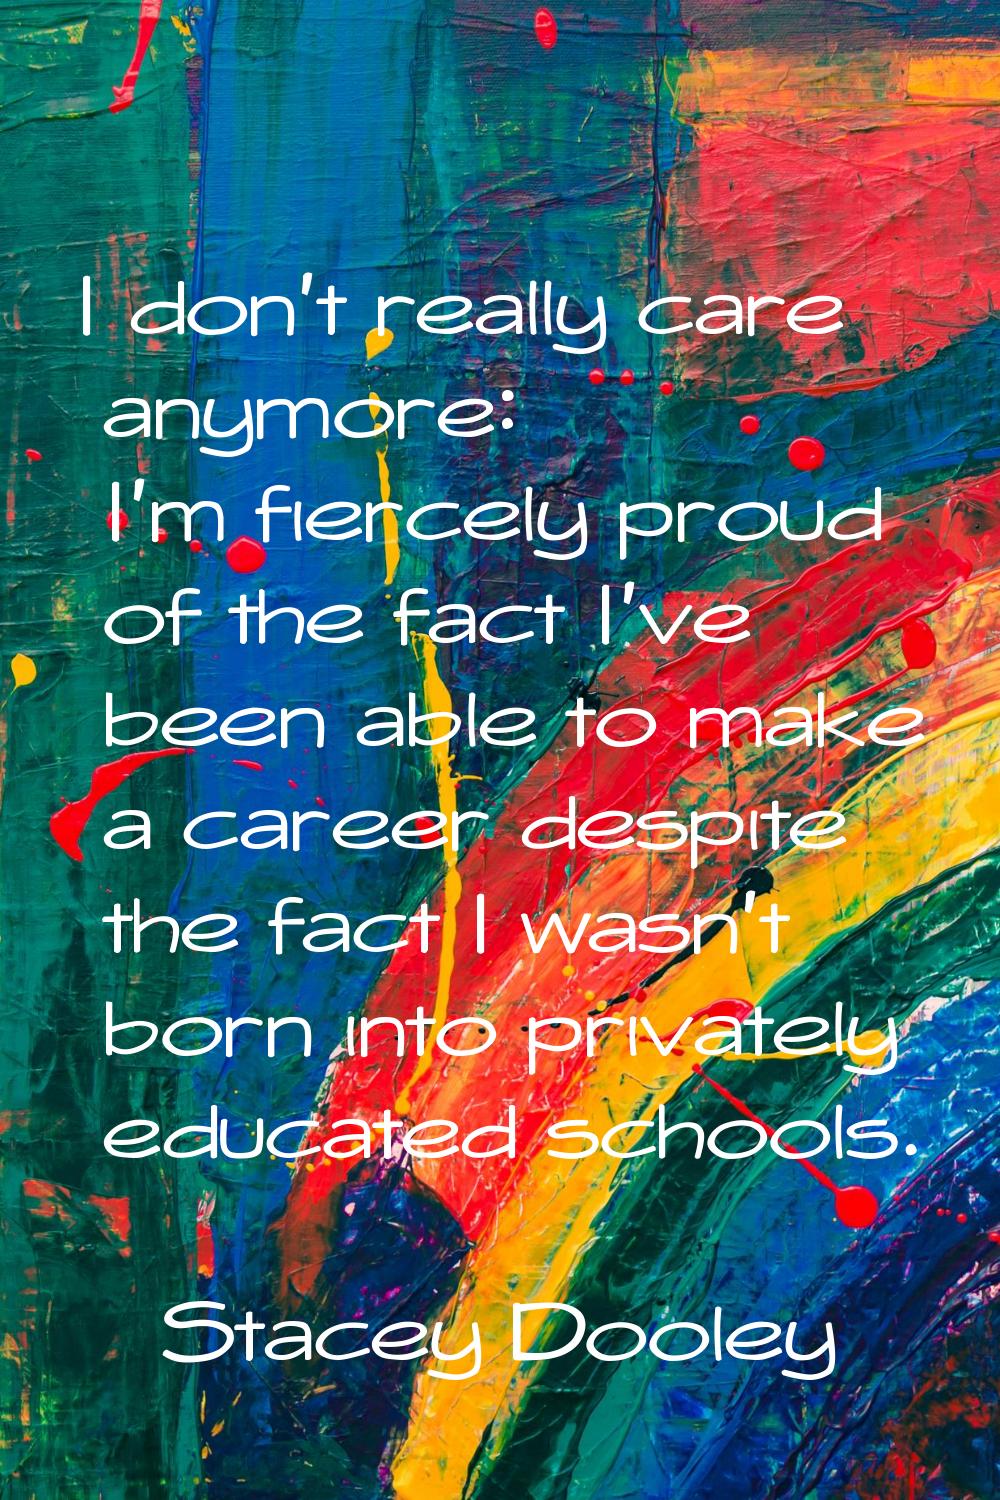 I don't really care anymore: I'm fiercely proud of the fact I've been able to make a career despite